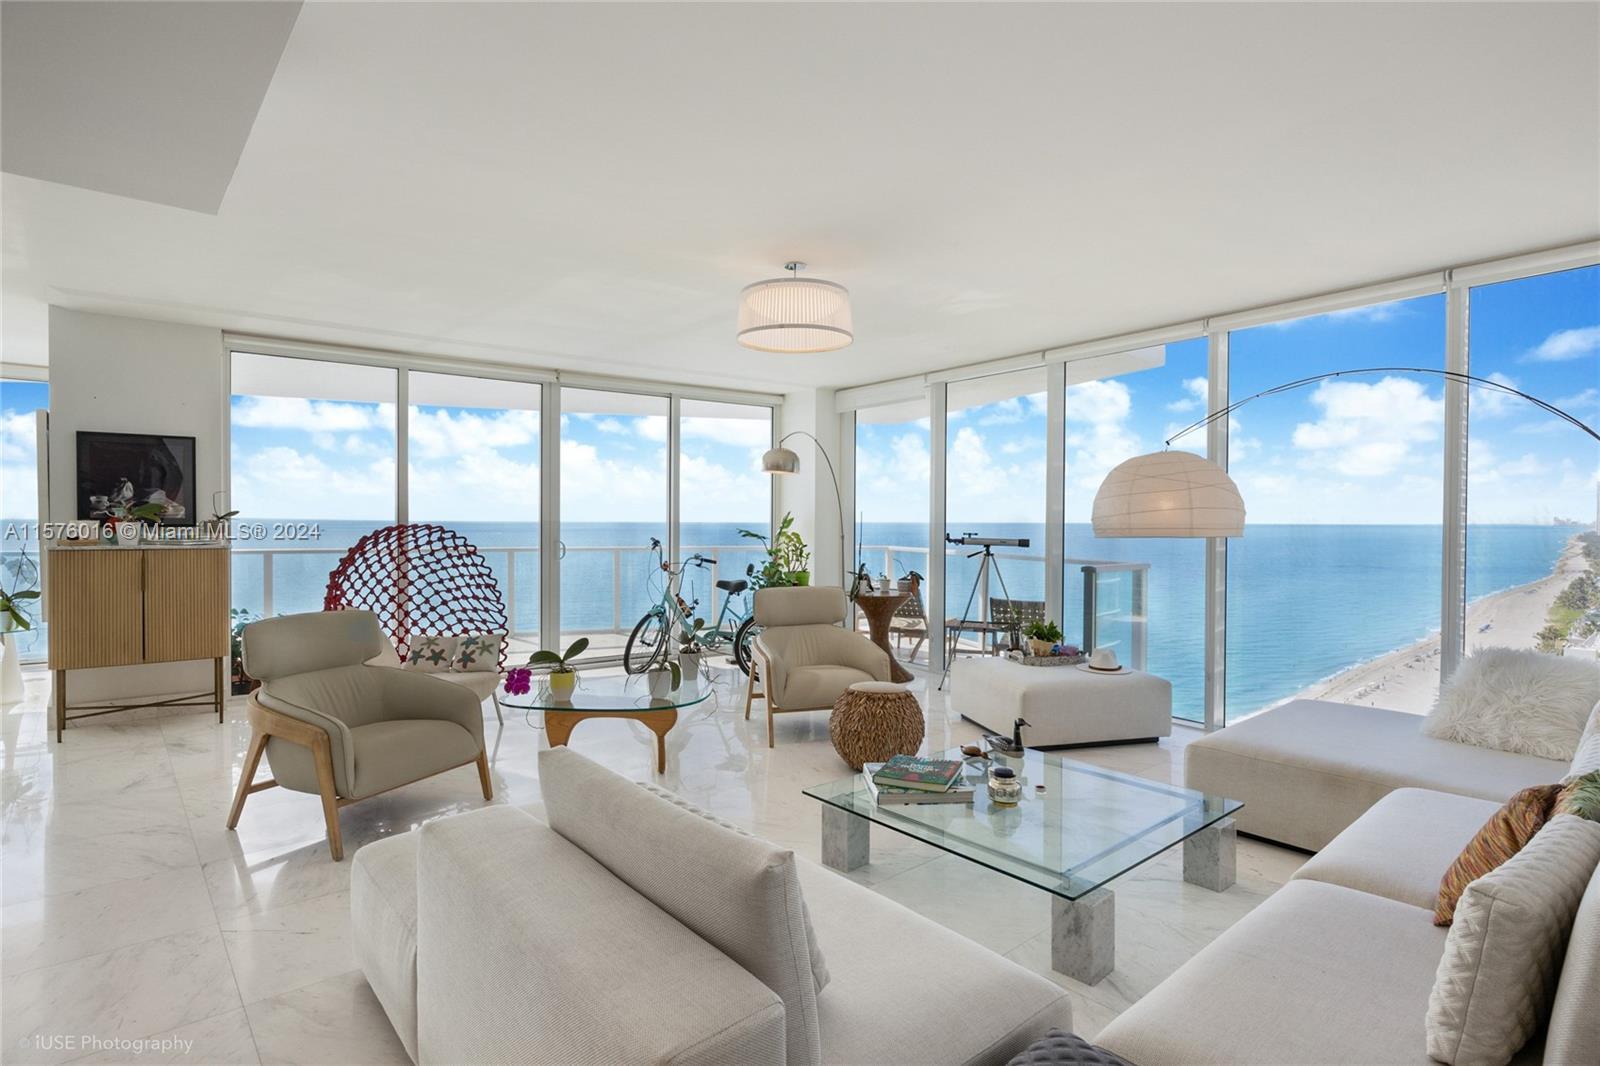 Experience the allure of the boundless ocean from this exquisite residence at Apogee Beach condo.  W